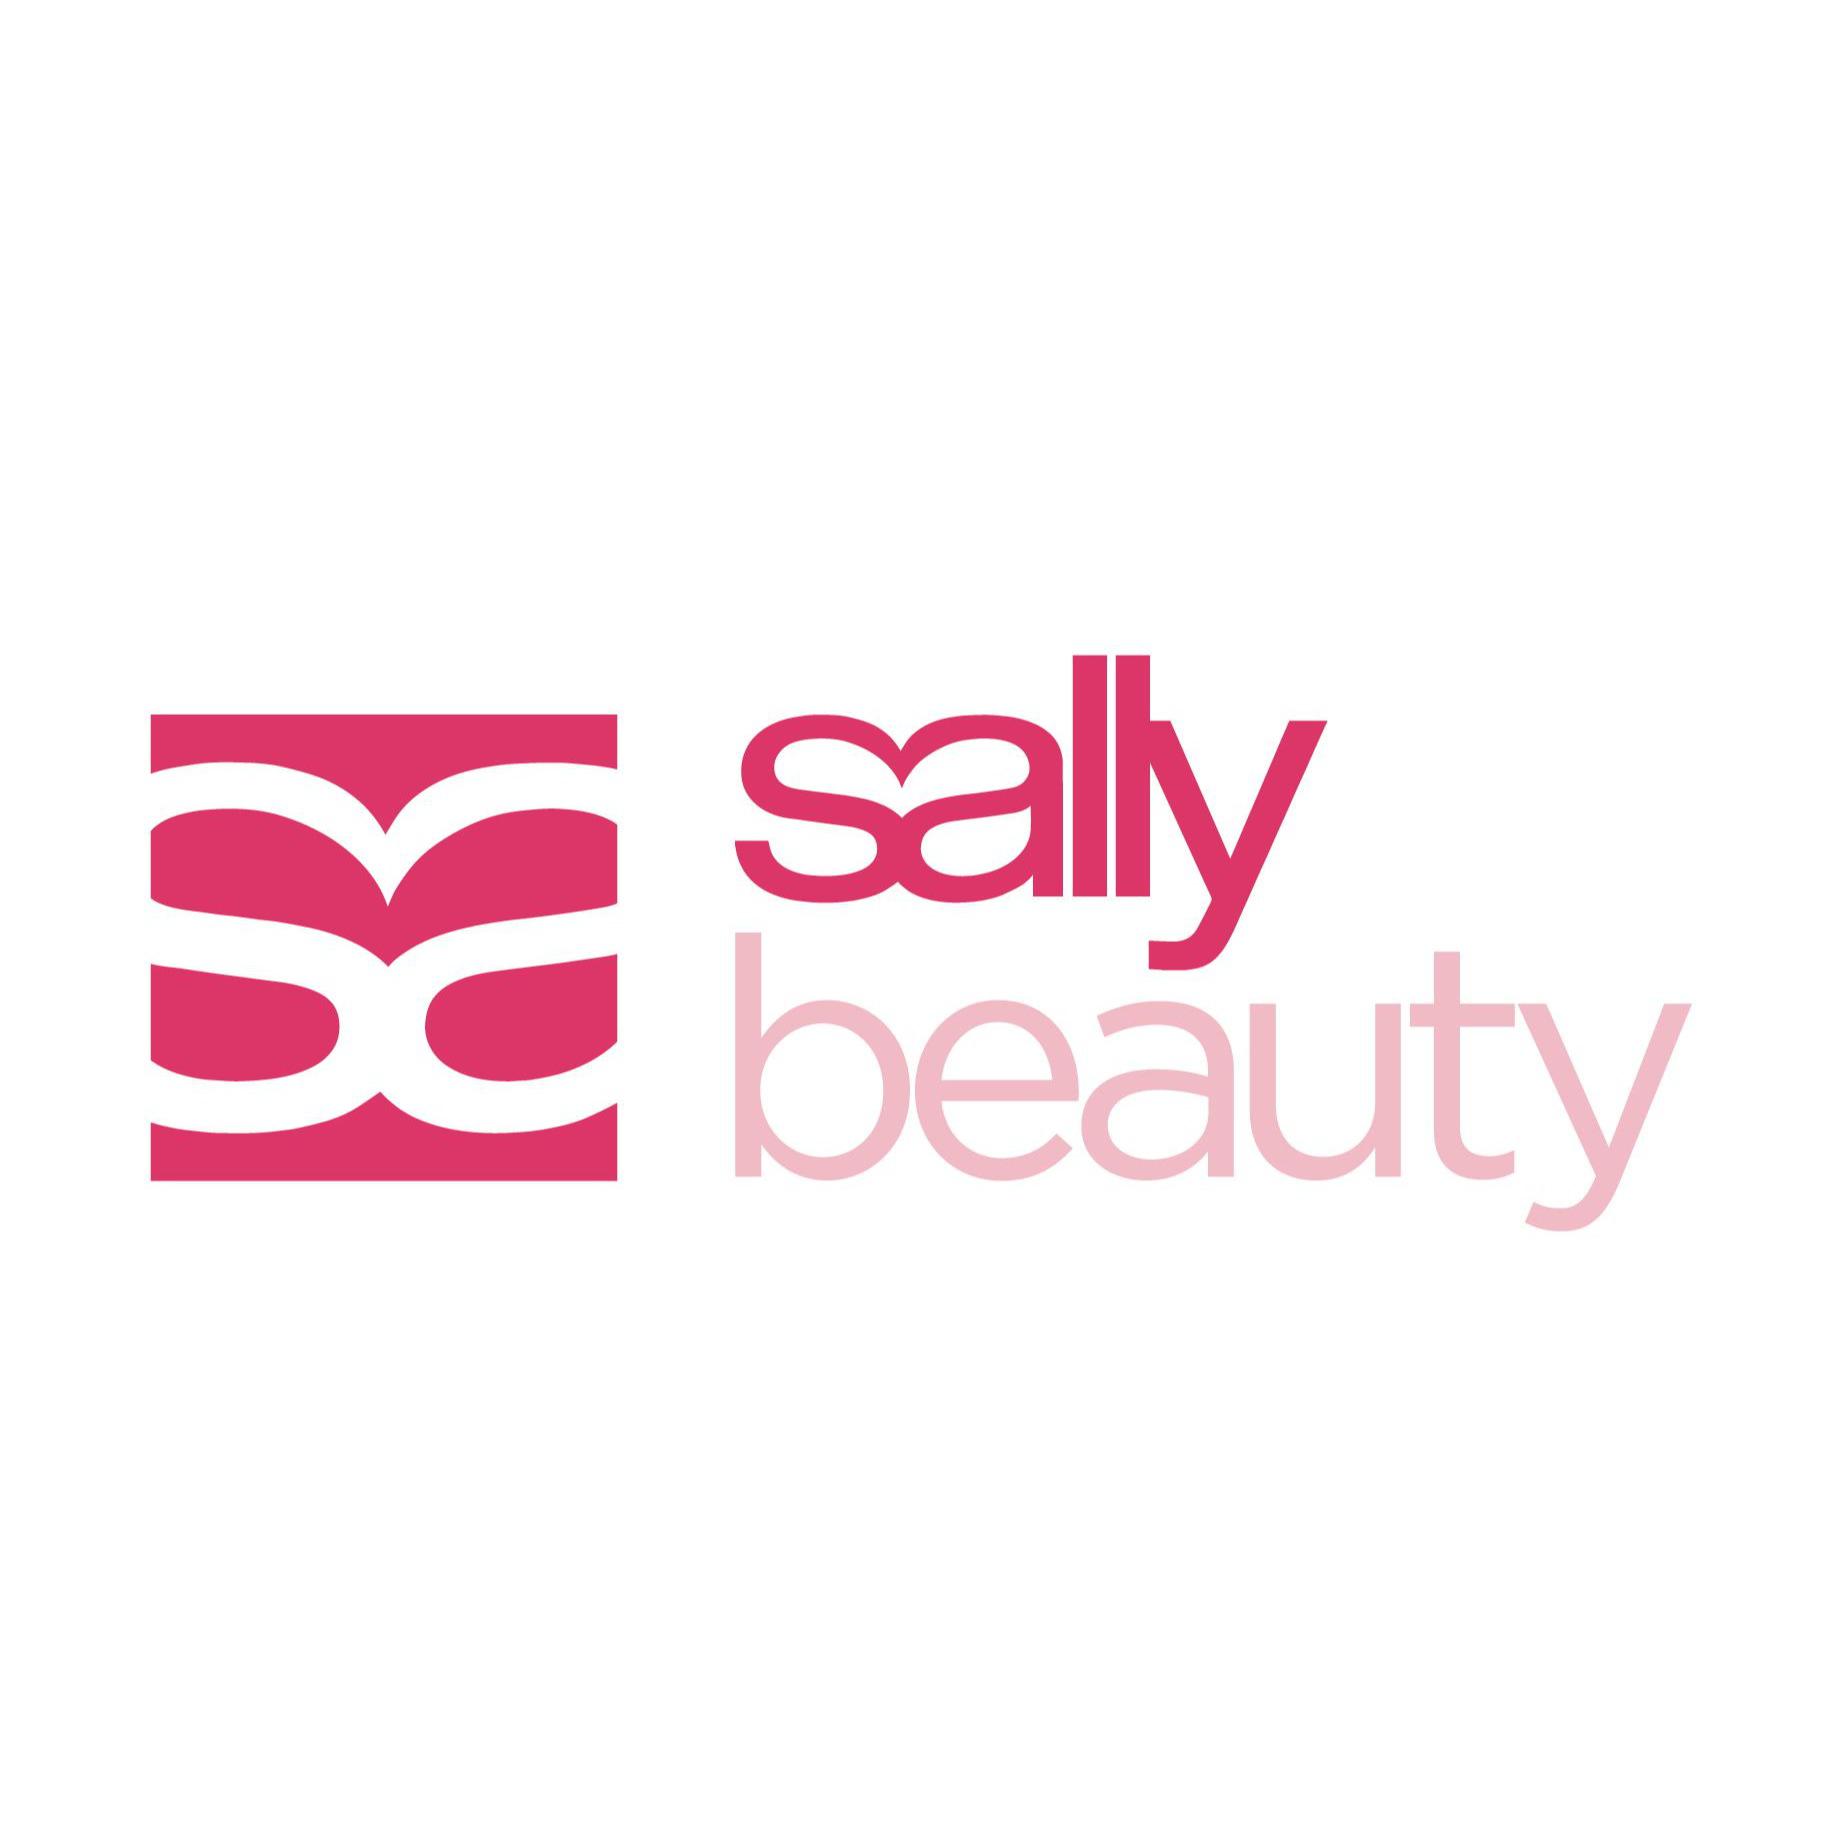 Sally Beauty - Sutton Coldfield, West Midlands B76 1DH - 01213 132352 | ShowMeLocal.com